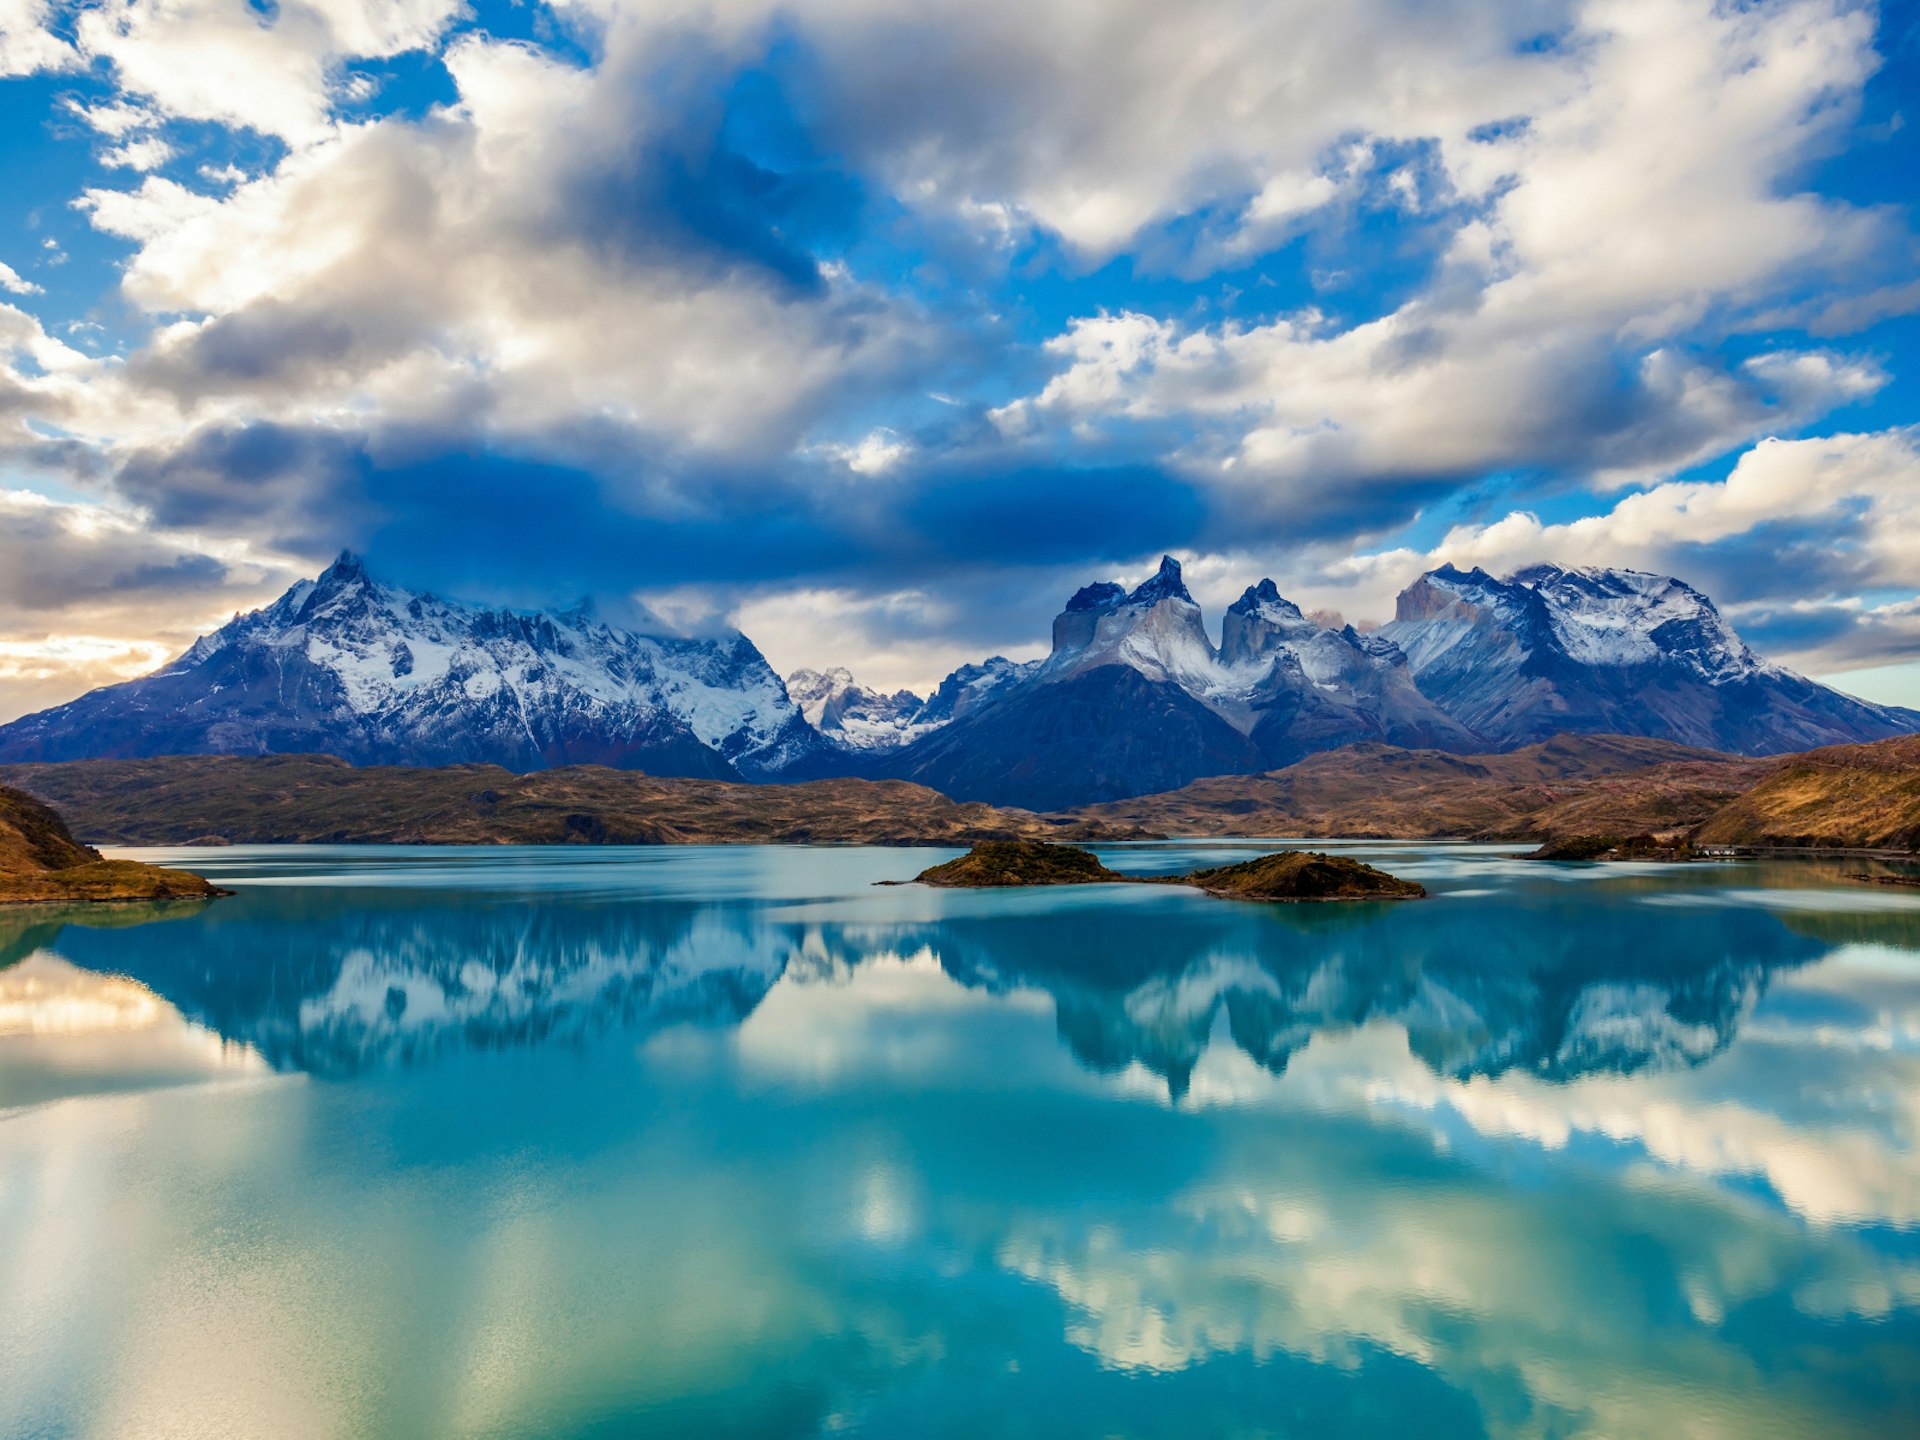 Mountain range and turquoise lake of the Torres del Paine National Park, Chile